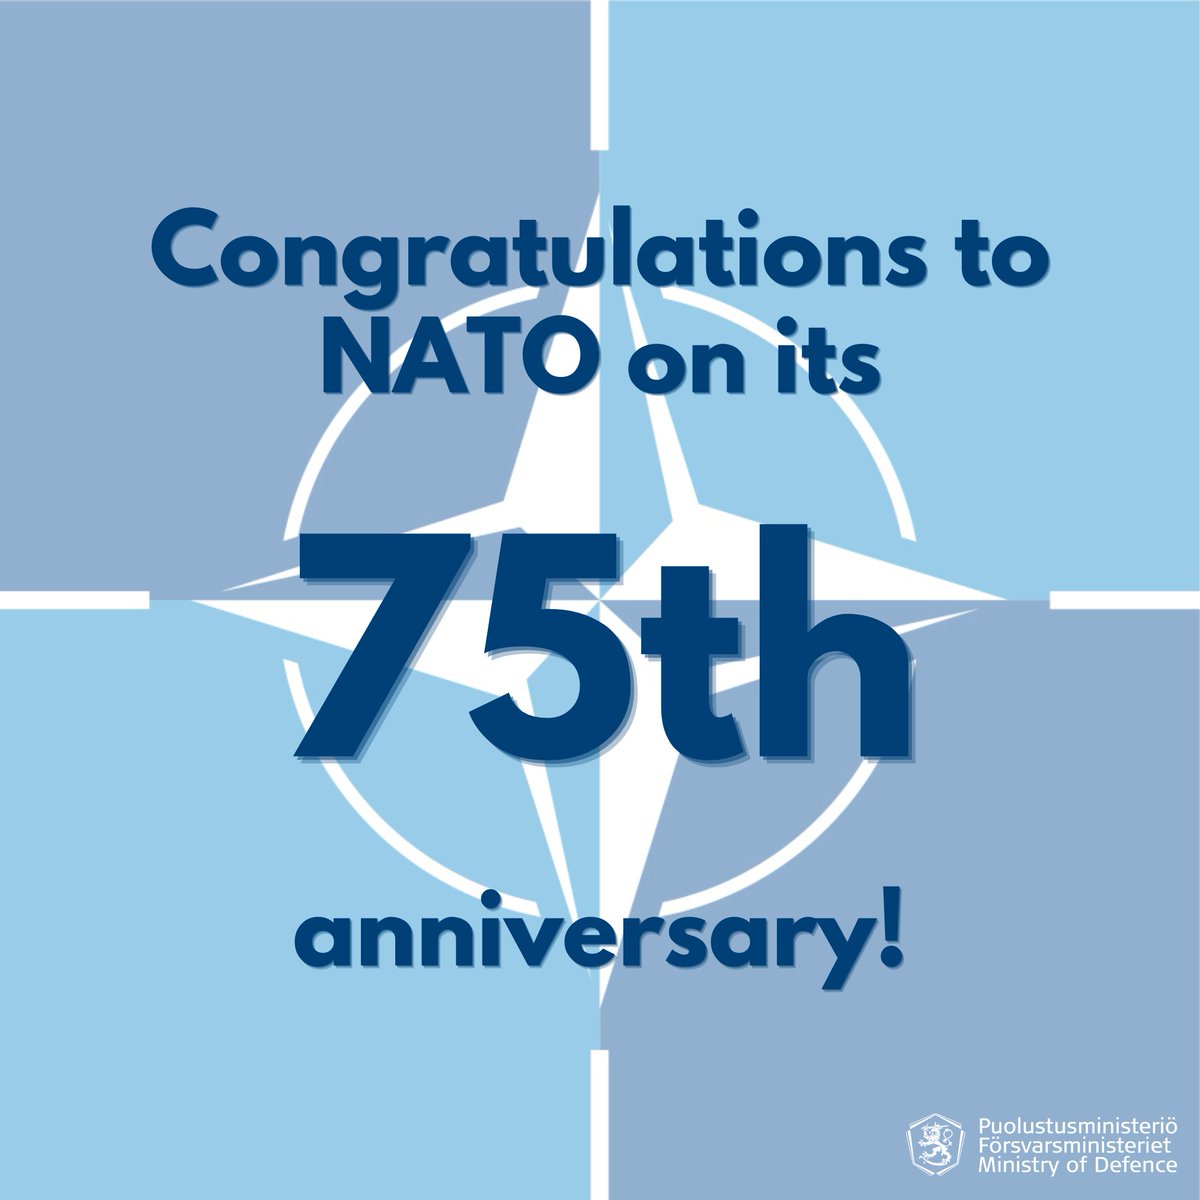 Together, we are stronger and safer. Happy 75th anniversary, @NATO! 🎂 #1NATO75years #StrongerTogether #WeAreNATO